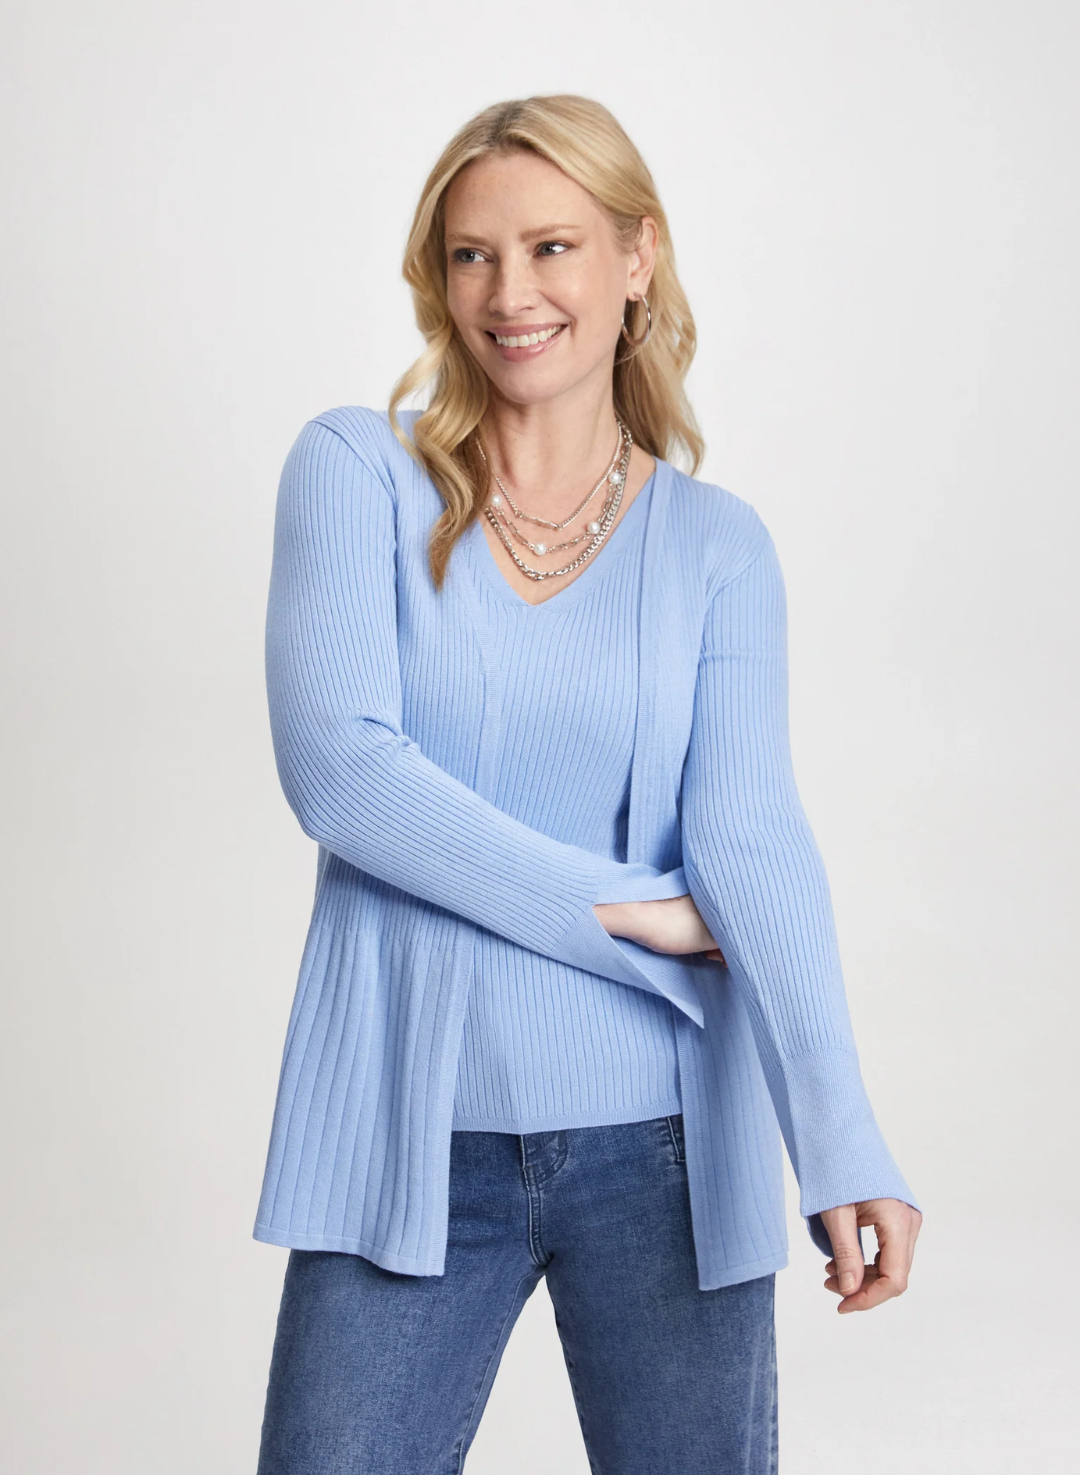 model wearing a blue knit cardigan and sweater